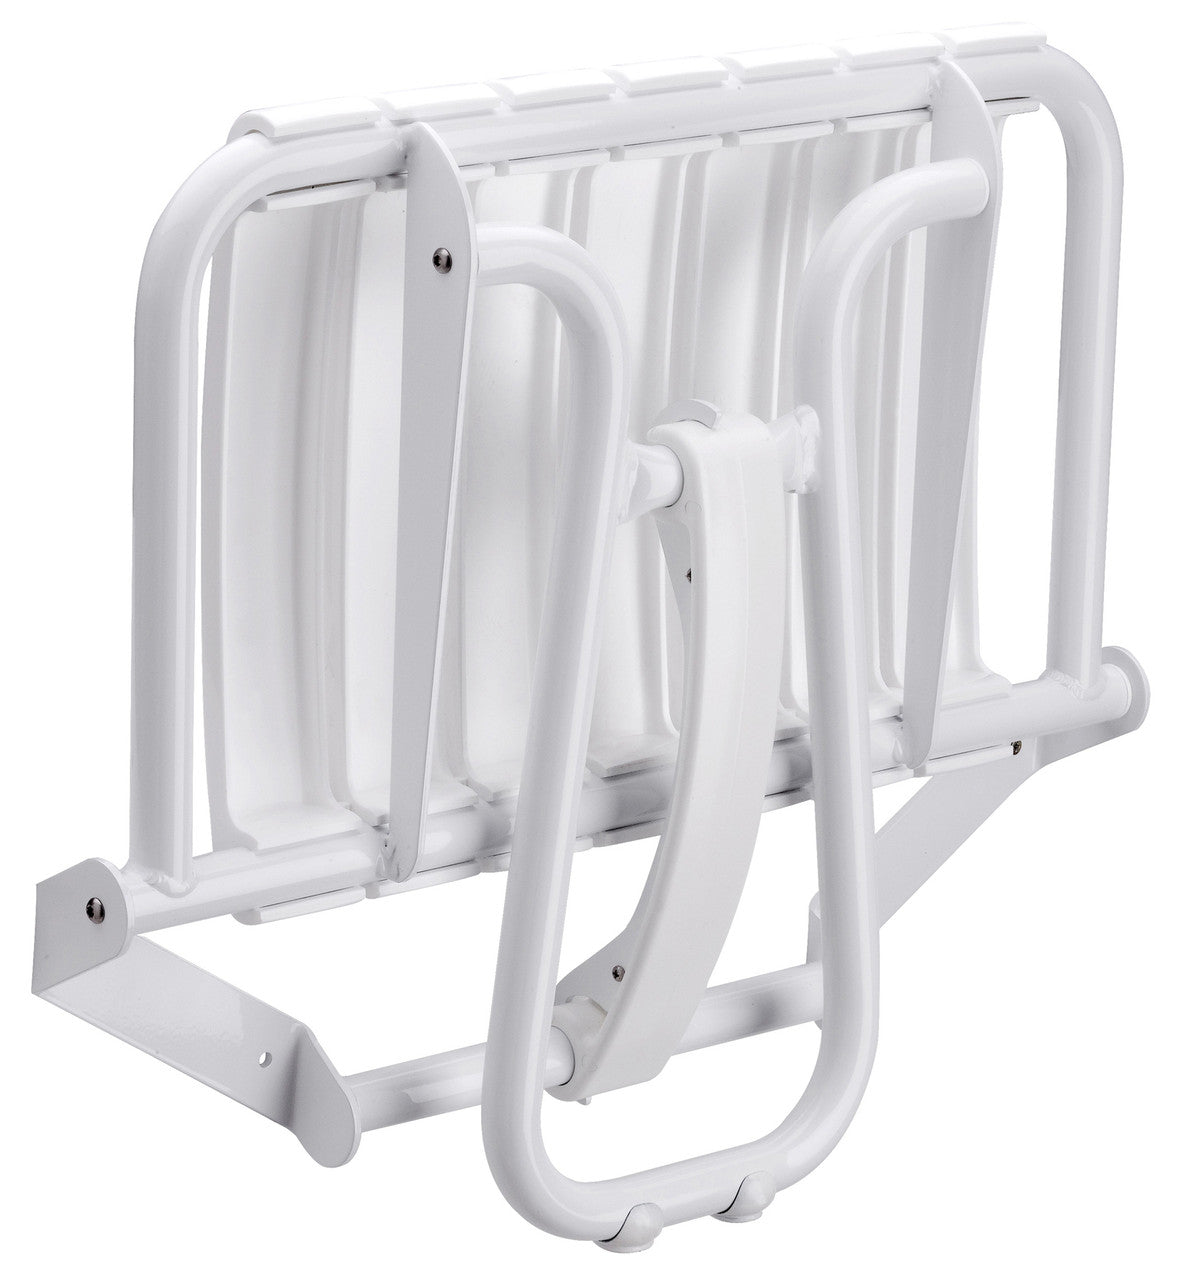 23" Eleganto White Foldaway Wall Mount handicap Shower Seat with Integrated Support Stand